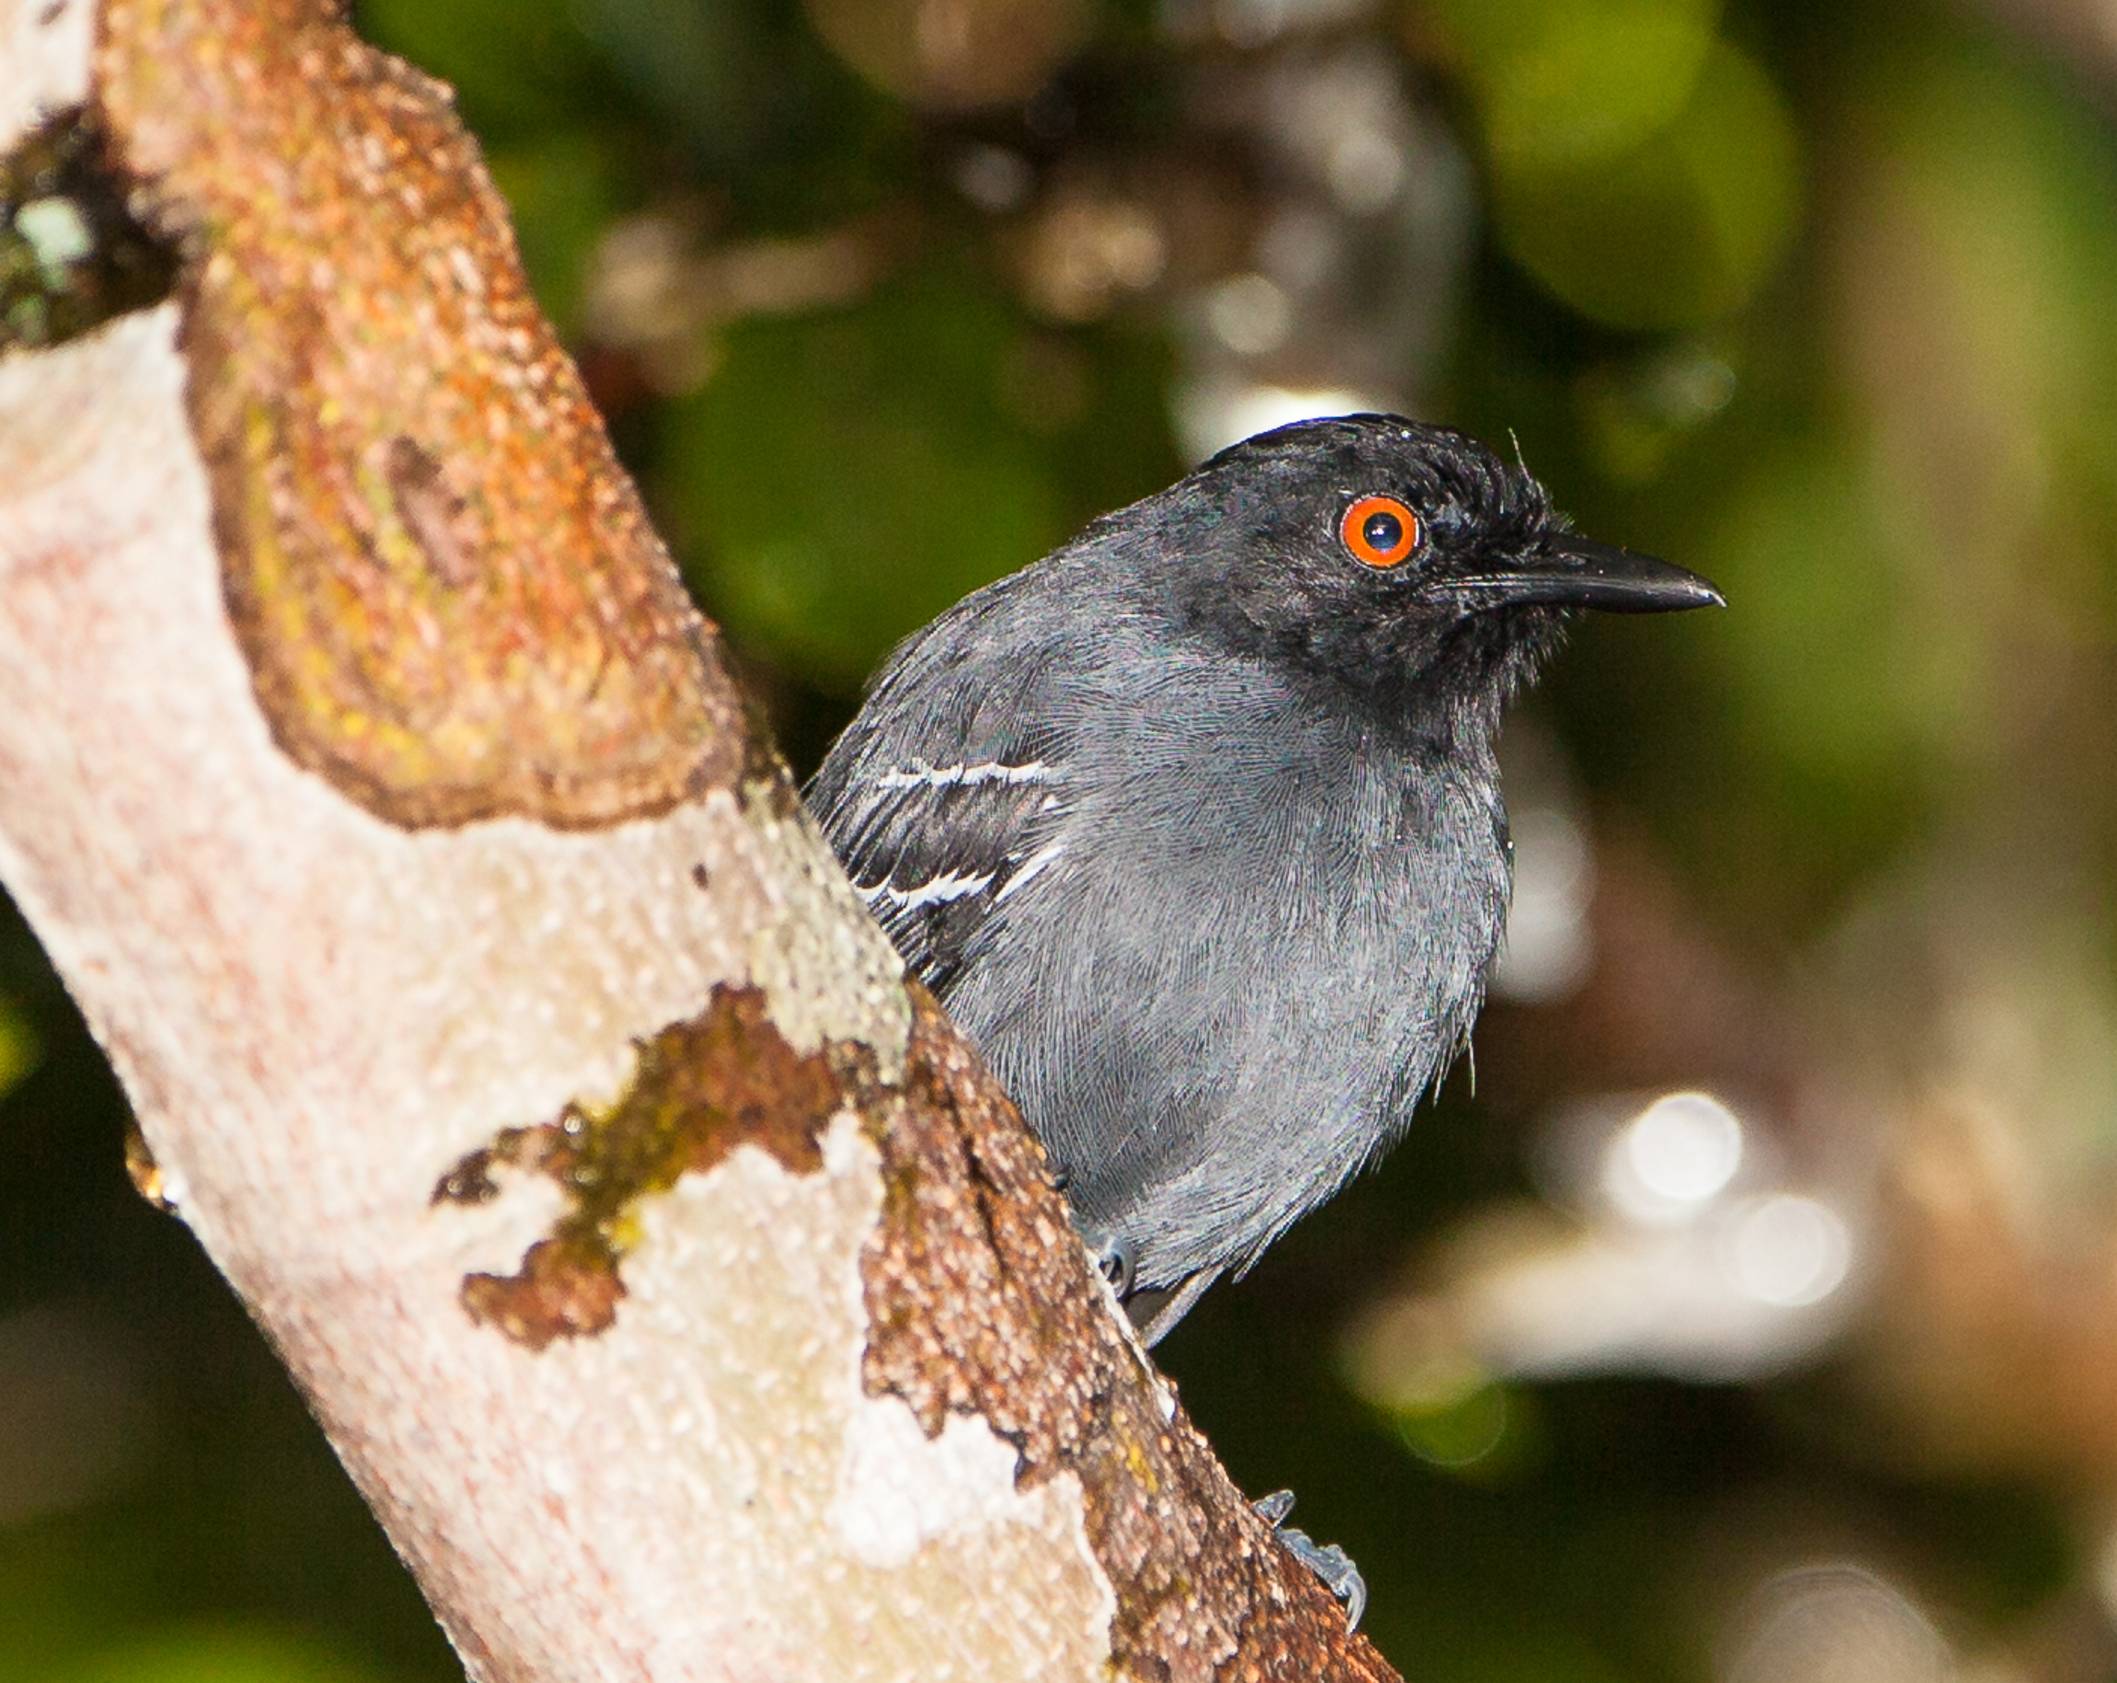 The Black-tailed Antbird (Myrmoborus melanurus) prefers to stay in the darkness and safety of the thickest scrubs of the amazonian forest, where it is endemic to Peru. Photo 26962753 © Joan Egert _ Dreamstime.com